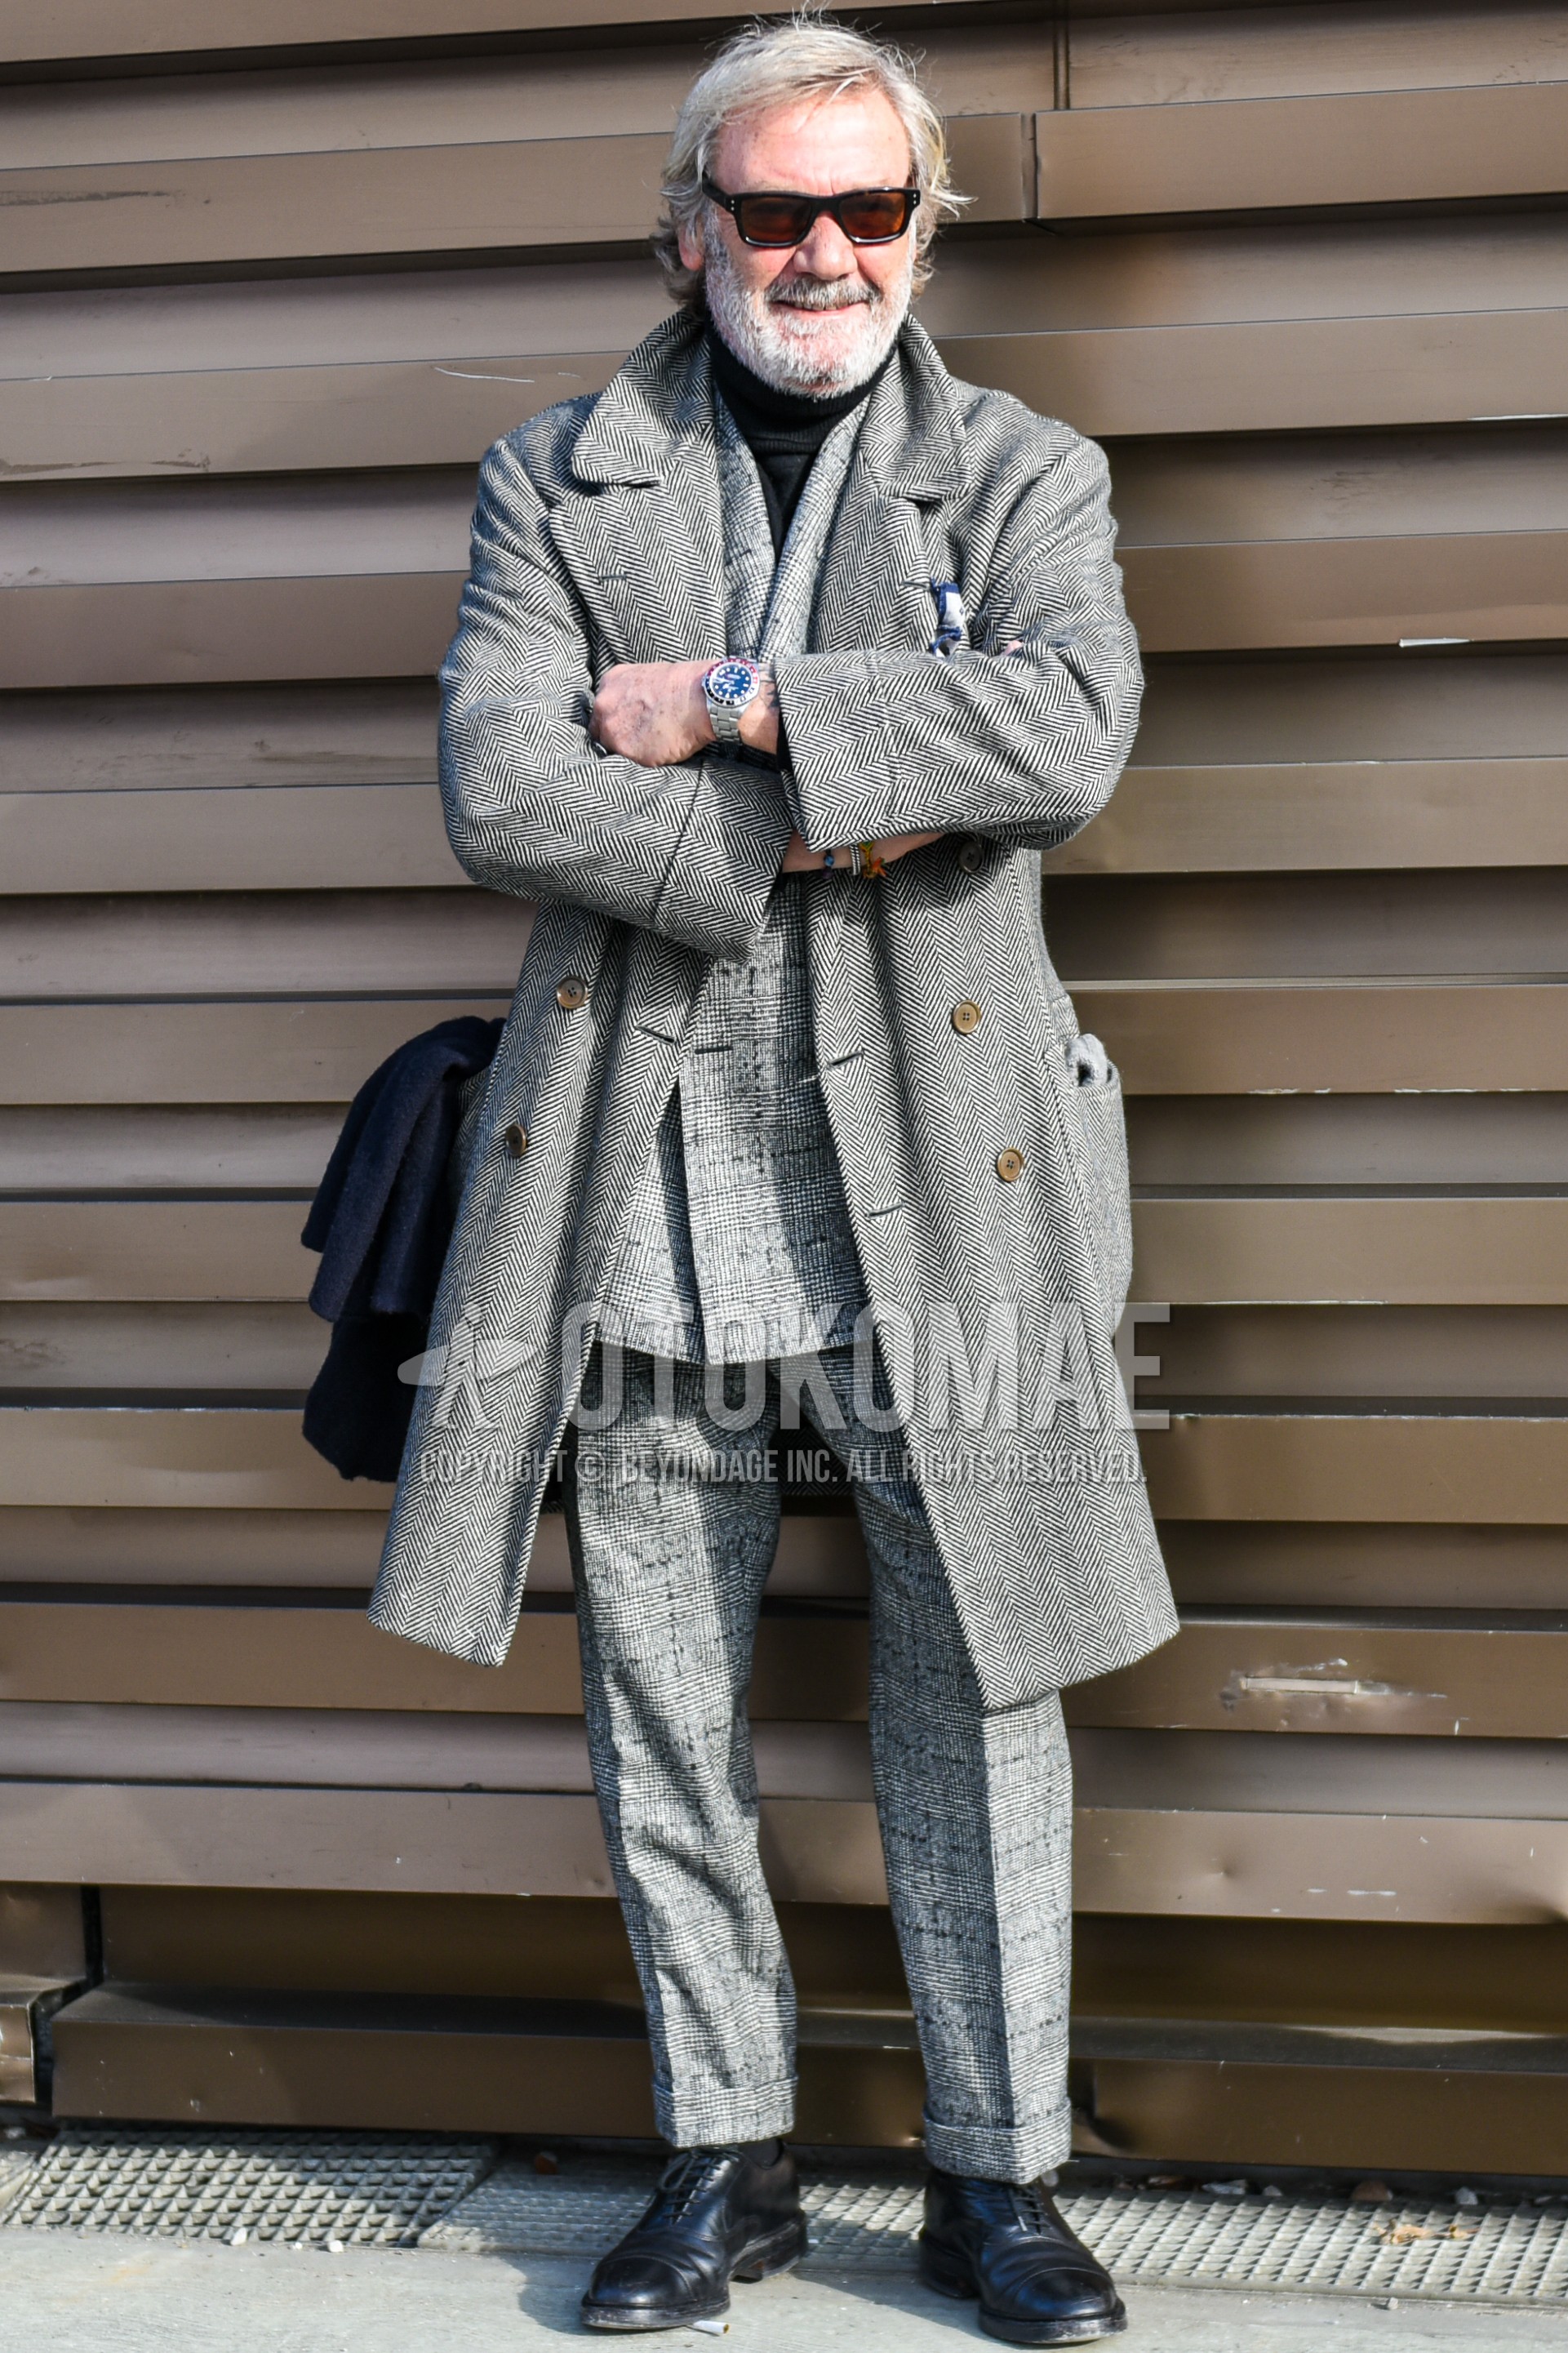 Men's autumn winter outfit with black plain sunglasses, gray herringbone ulster coat, black plain turtleneck knit, black straight-tip shoes leather shoes, gray check suit.